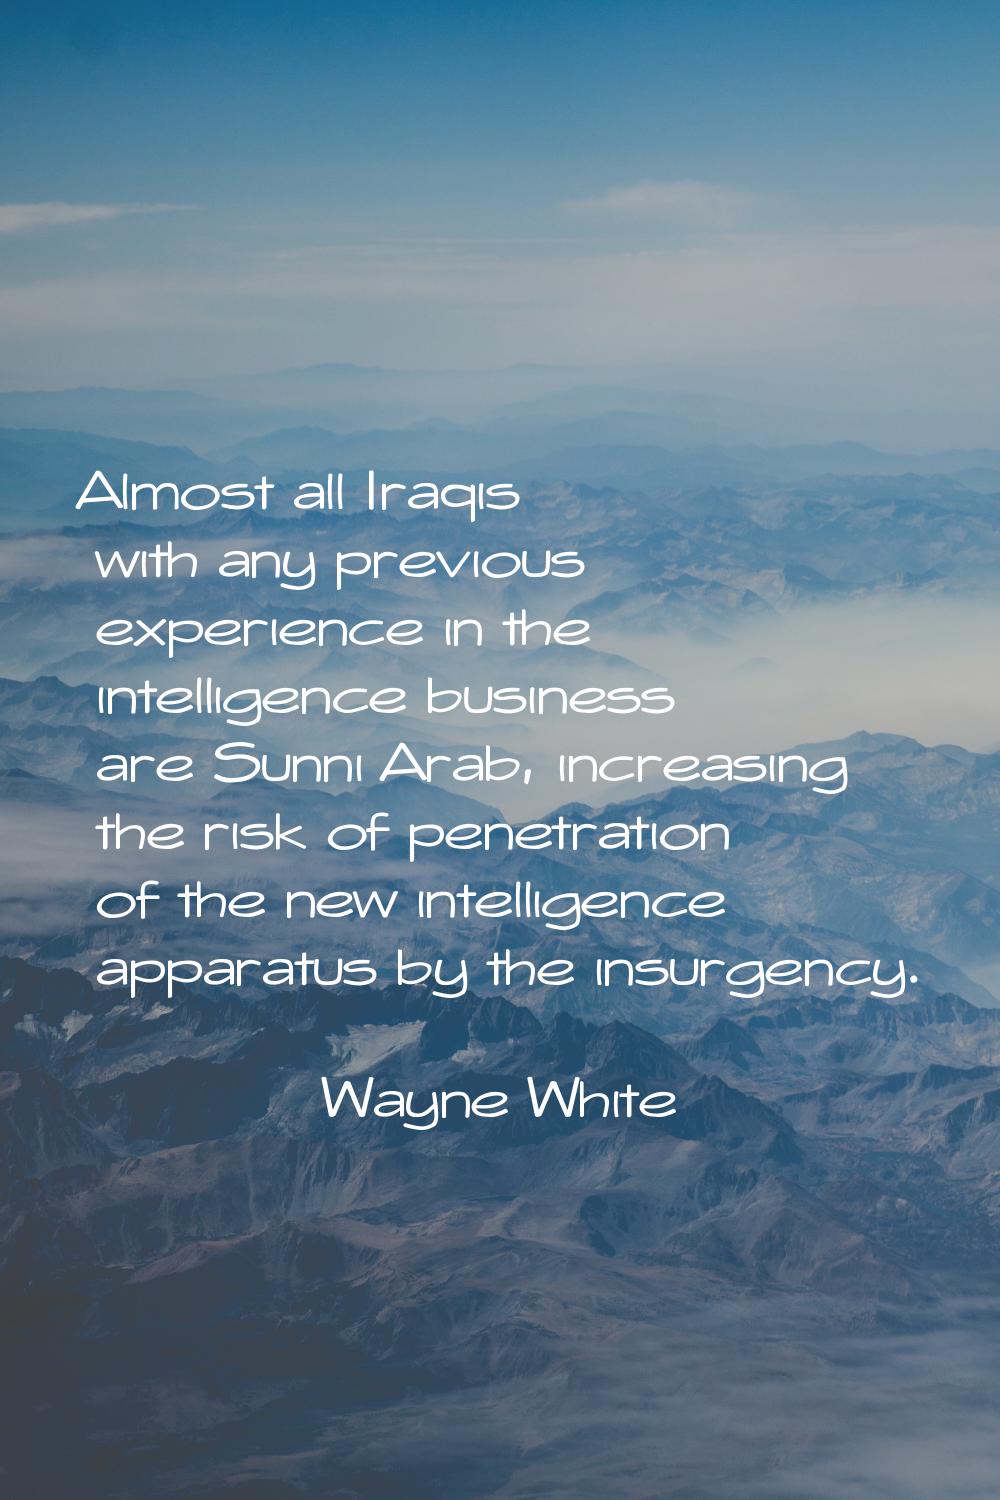 Almost all Iraqis with any previous experience in the intelligence business are Sunni Arab, increas